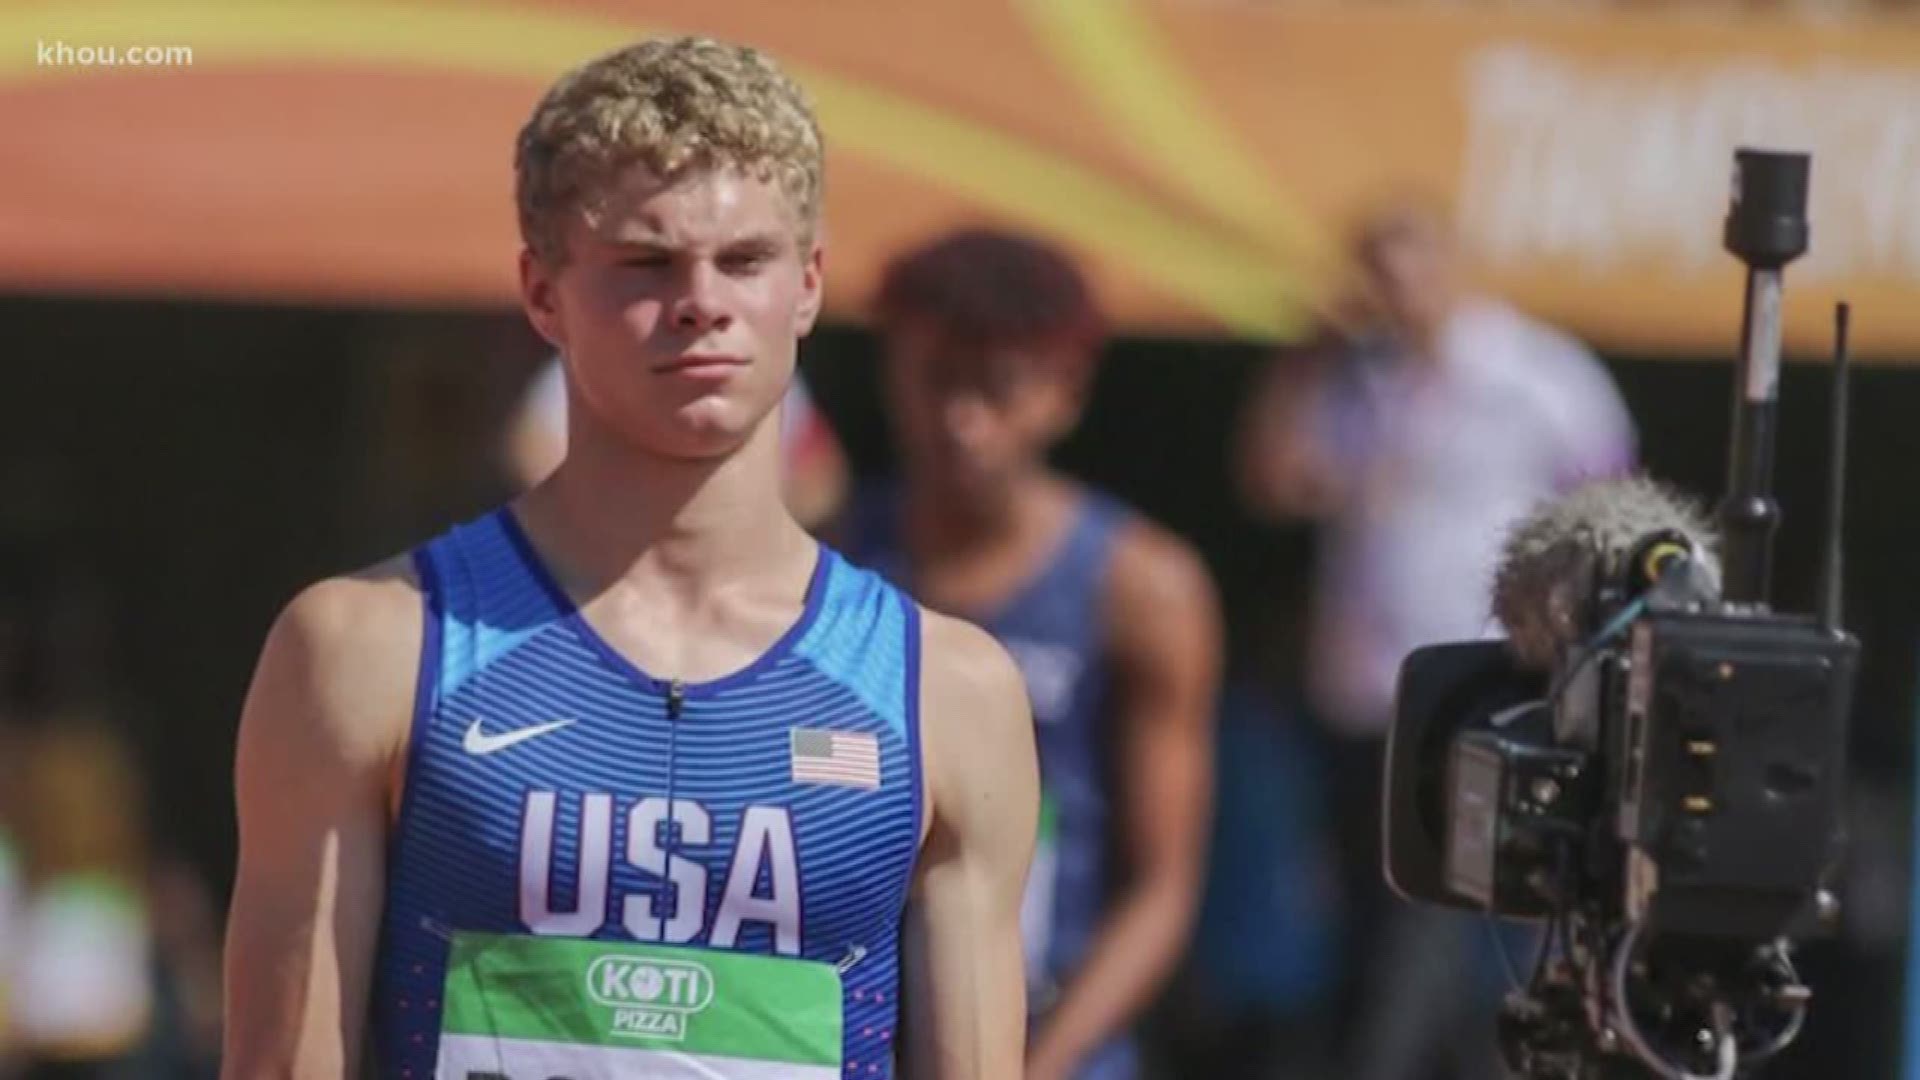 A Strake Jesuit high school senior is being called the fastest man in the country. After high school, Matthew Boling is focusing on the Olympics.